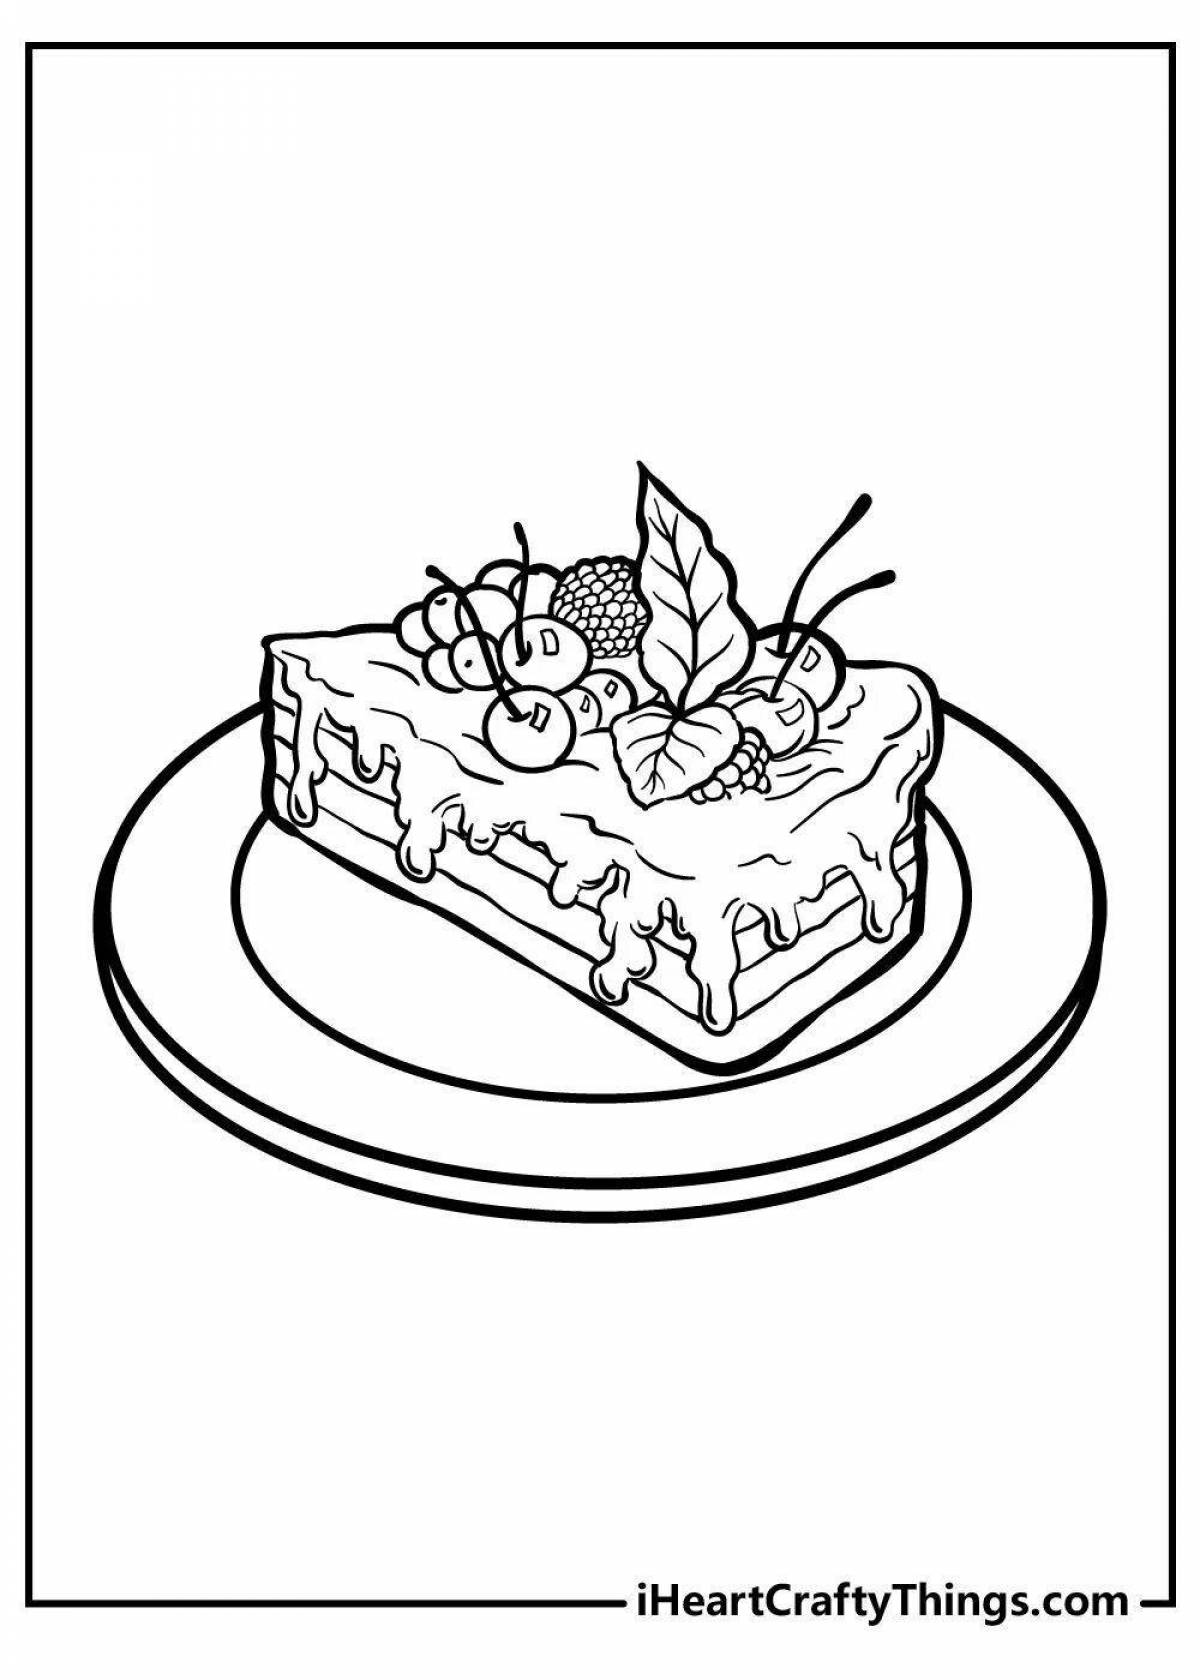 Creative cake coloring for 3-4 year olds